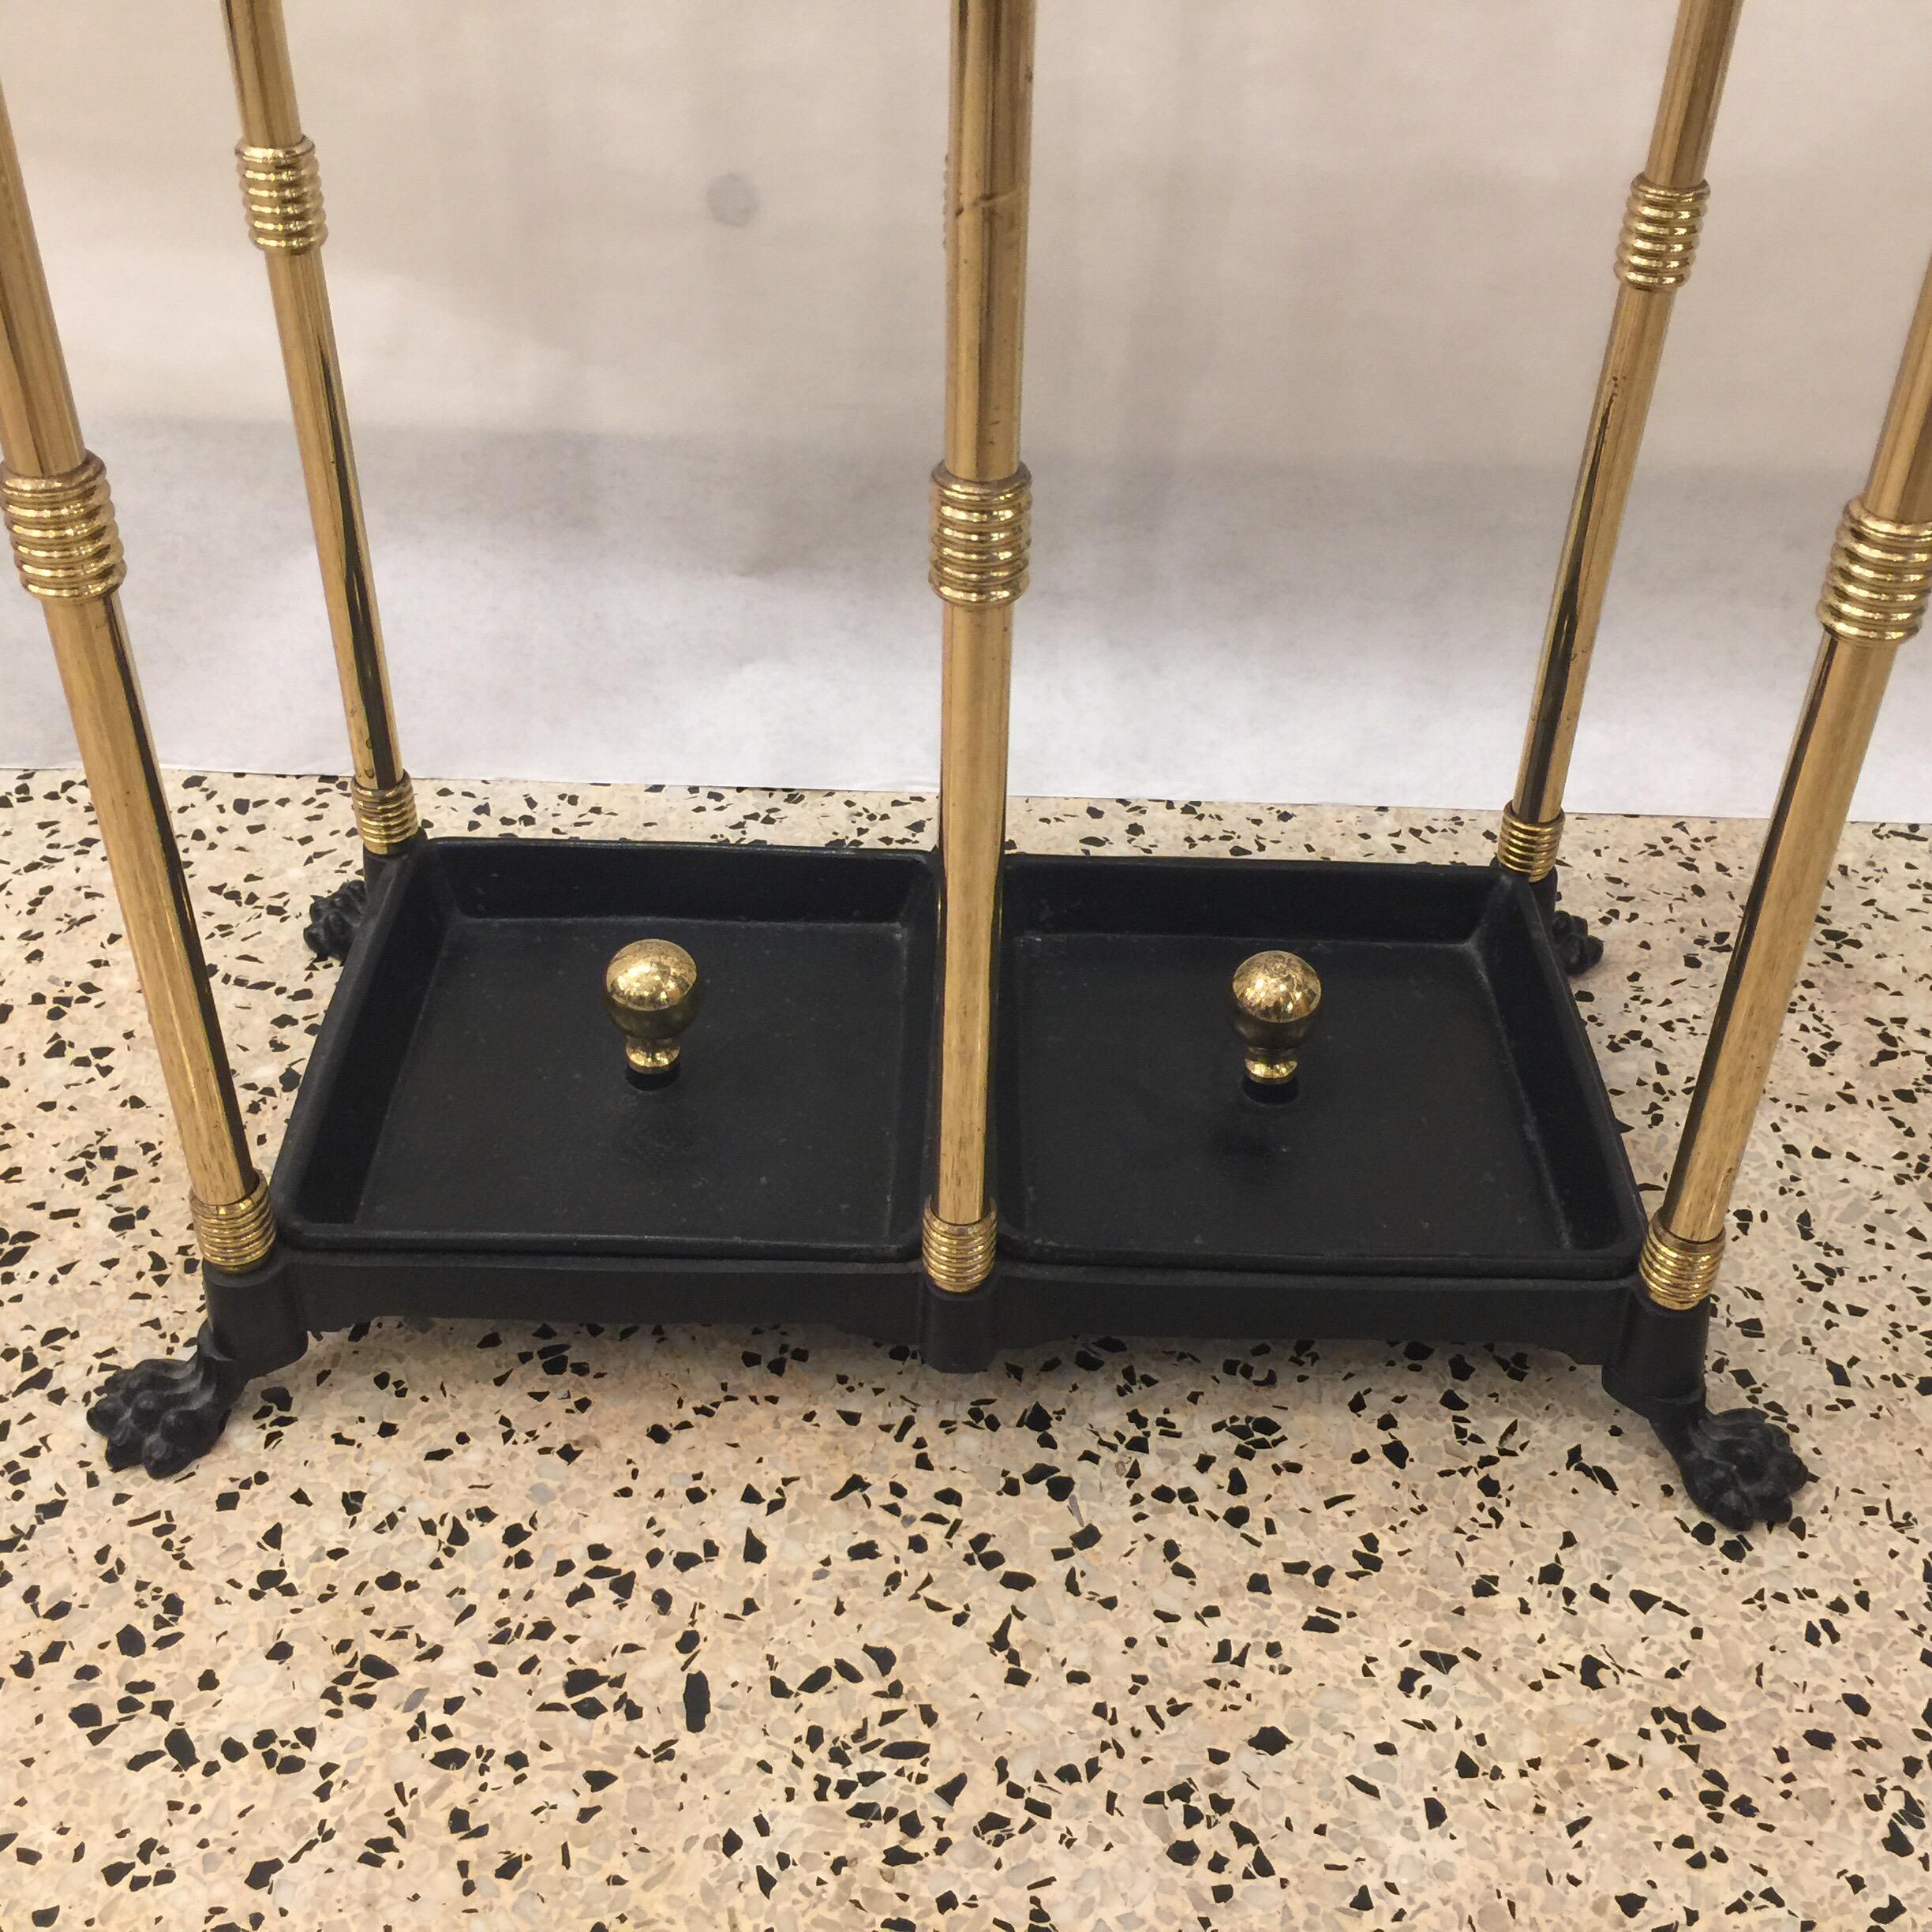 This is a wonderful solid brass and iron umbrella holder with removable trays to bottom (two). The Claw feet and brass ball finials are so fun and whimsical.